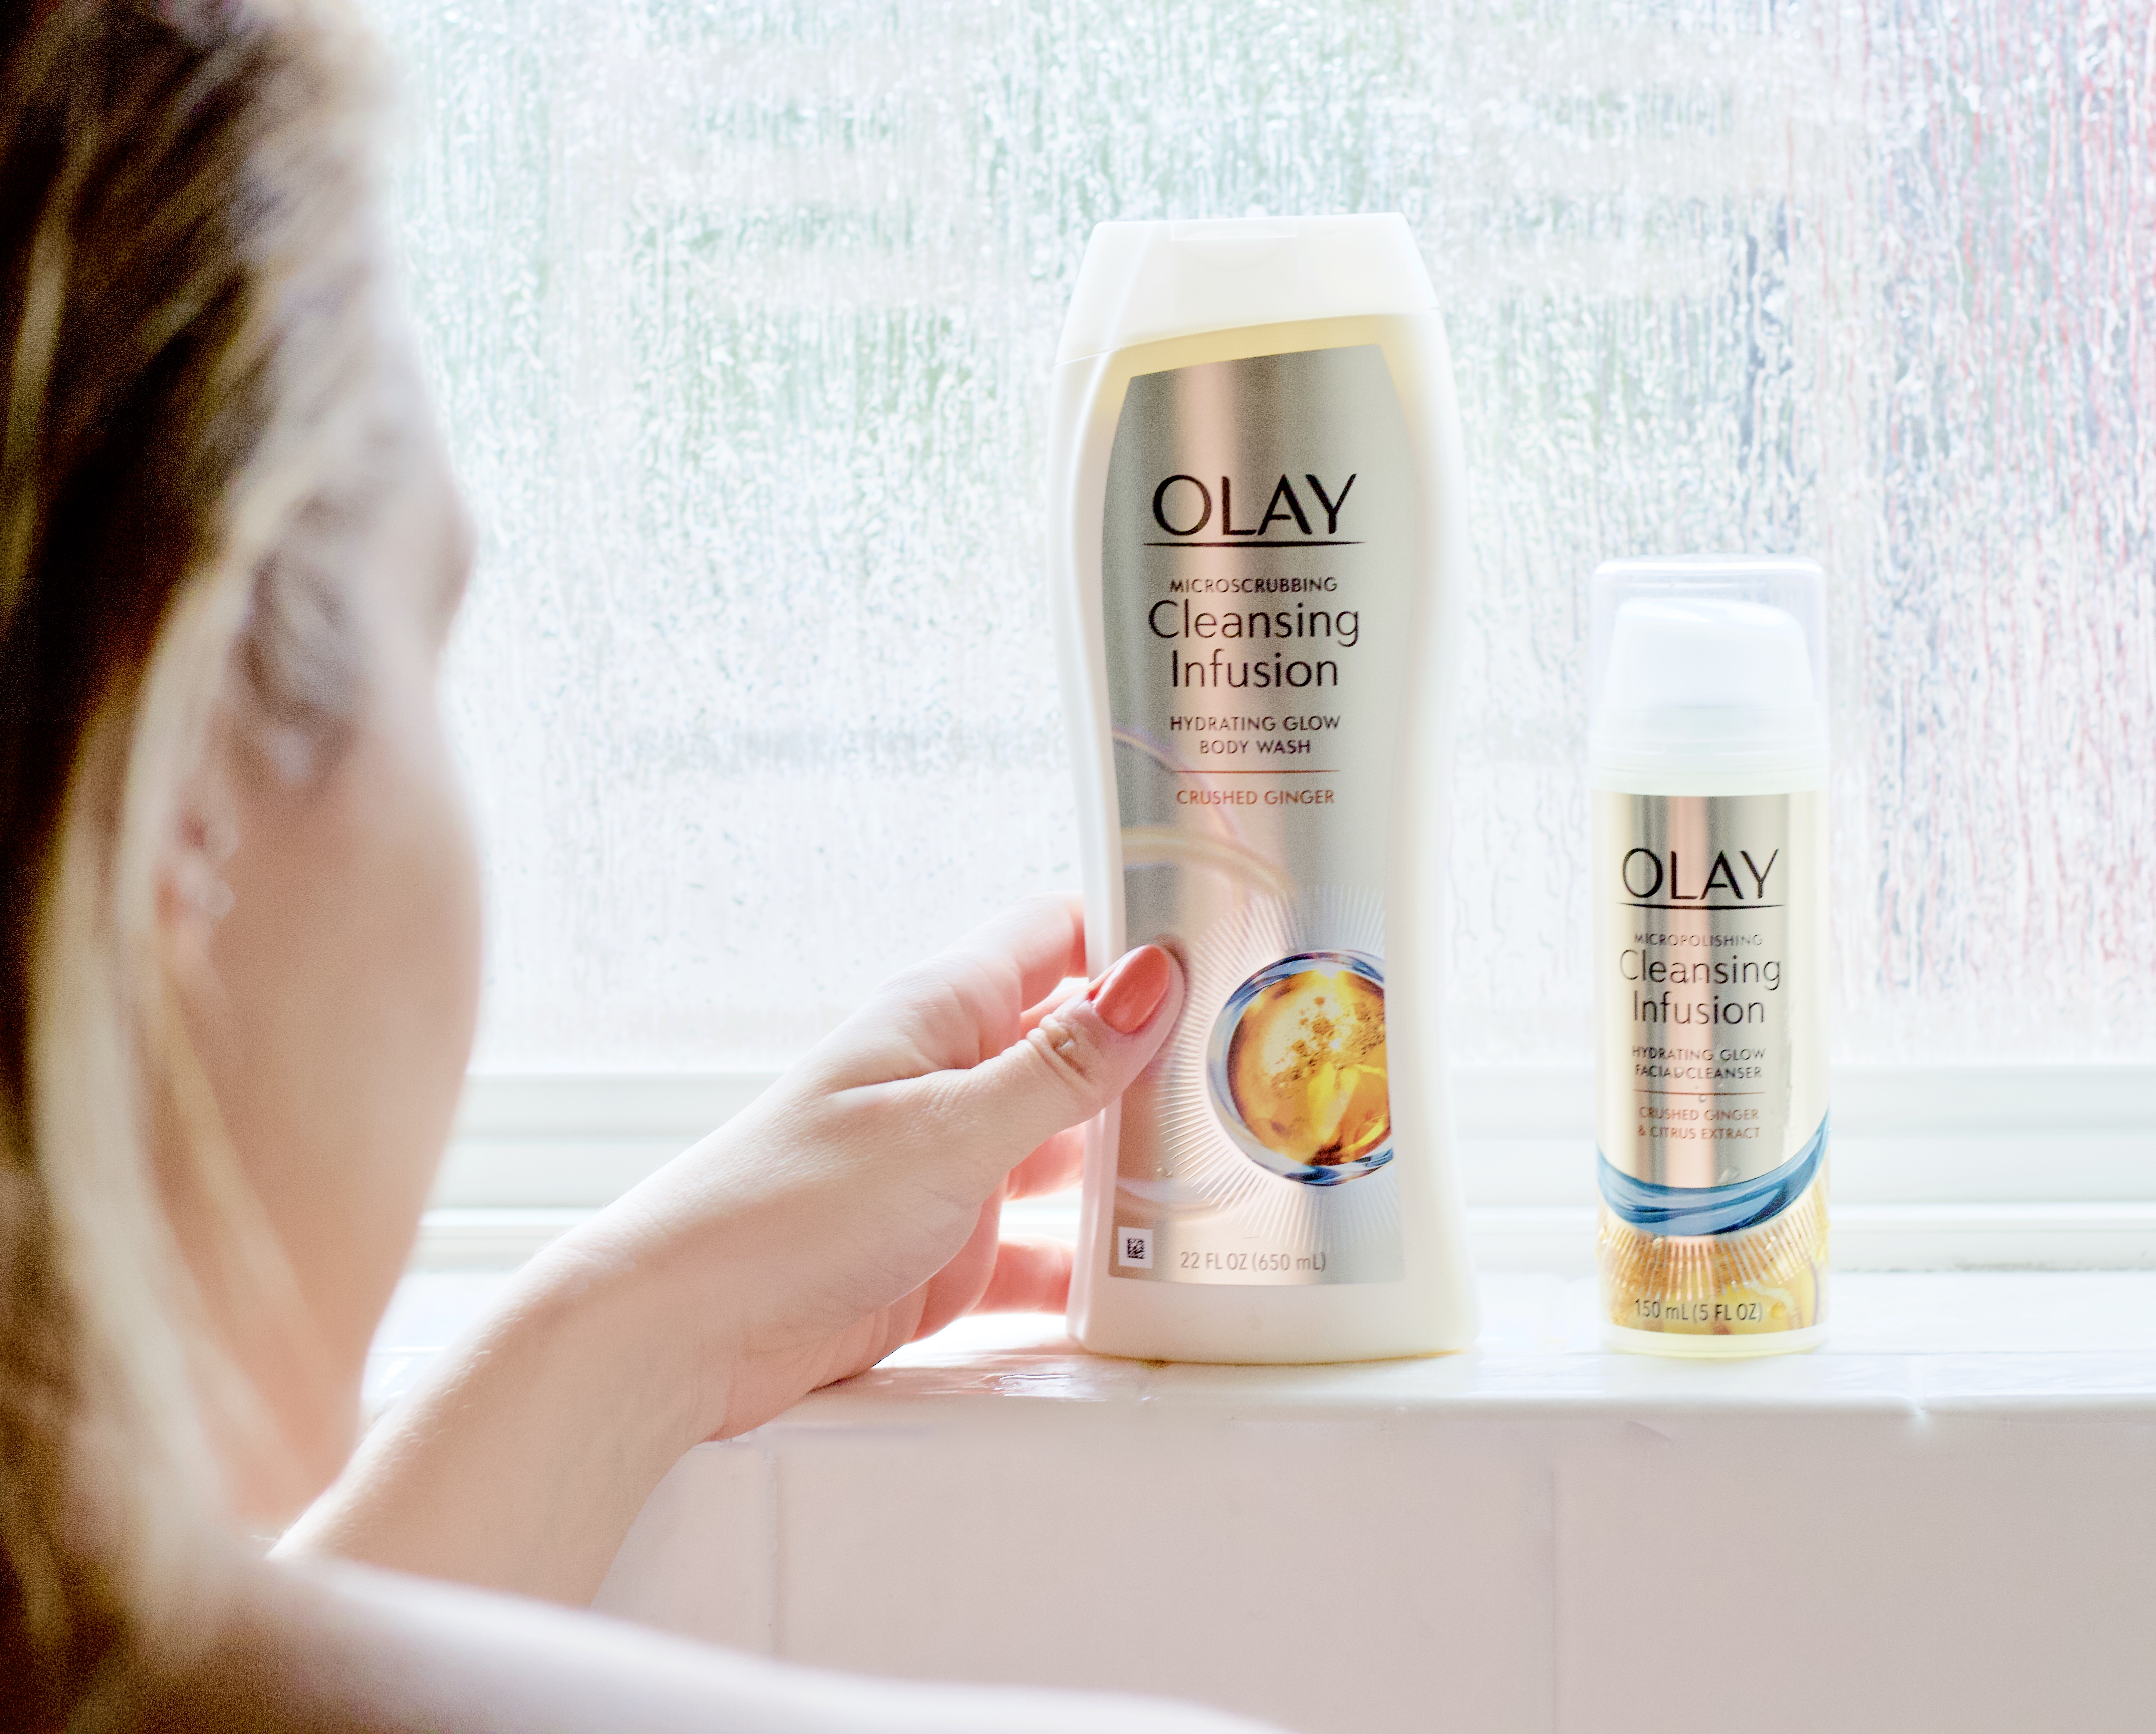 #glowup with olay #olay #skincare #glowingskin